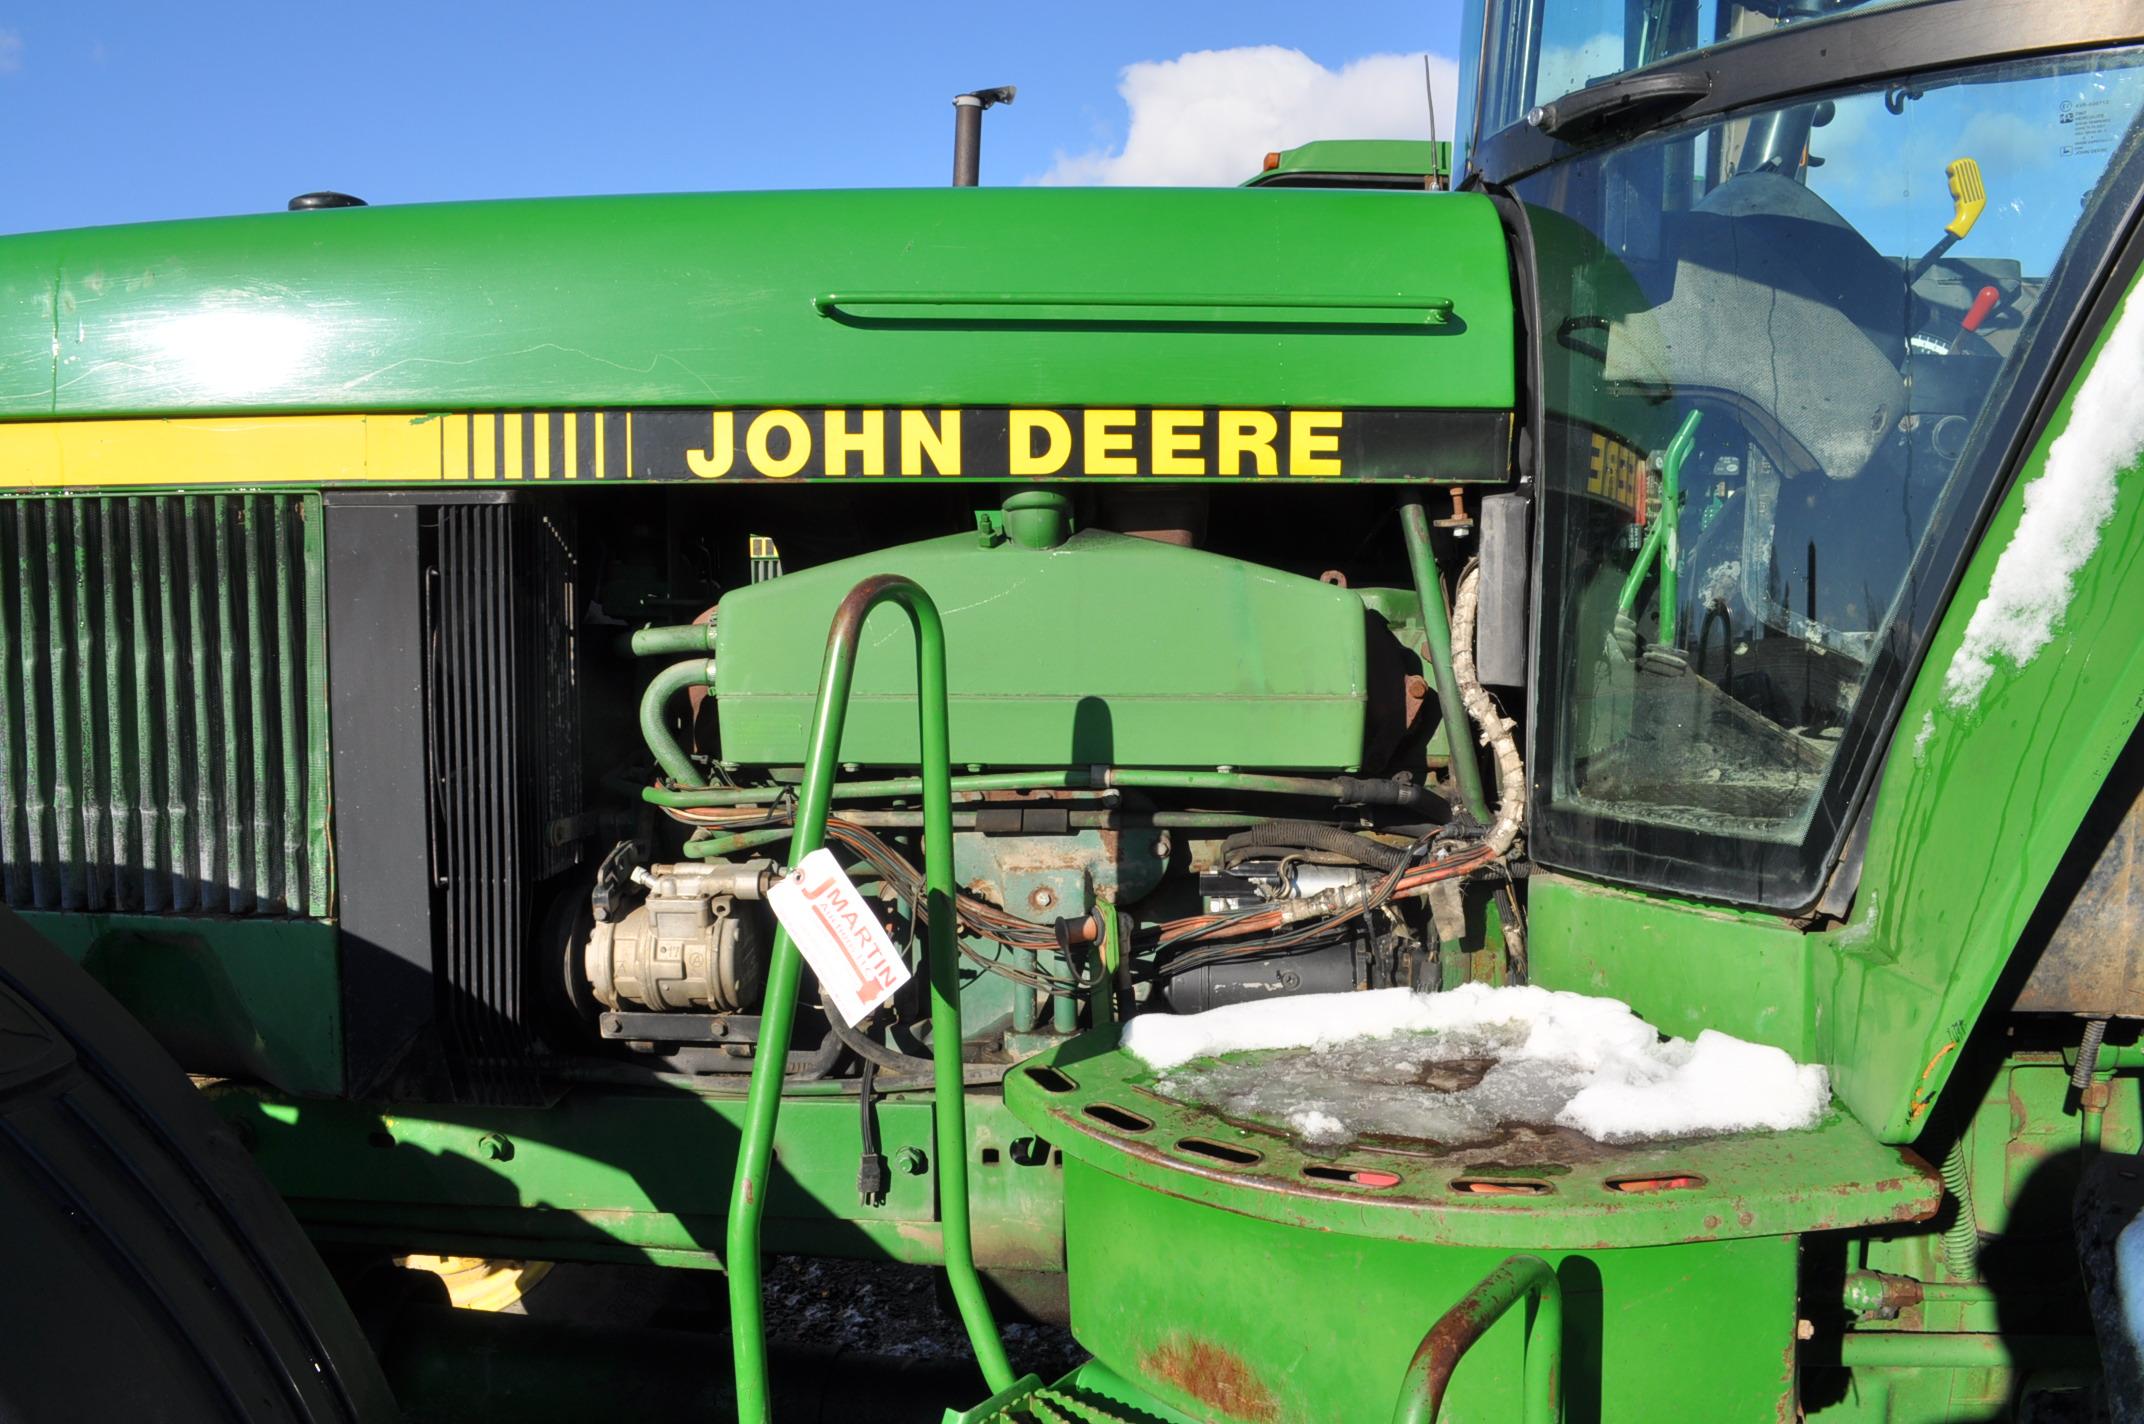 JD 4960 w/ 1,578hrs showing, 15spd power shift, 4wd, 18.4R42 rear axle duals, quick hitch, 1000 pto,